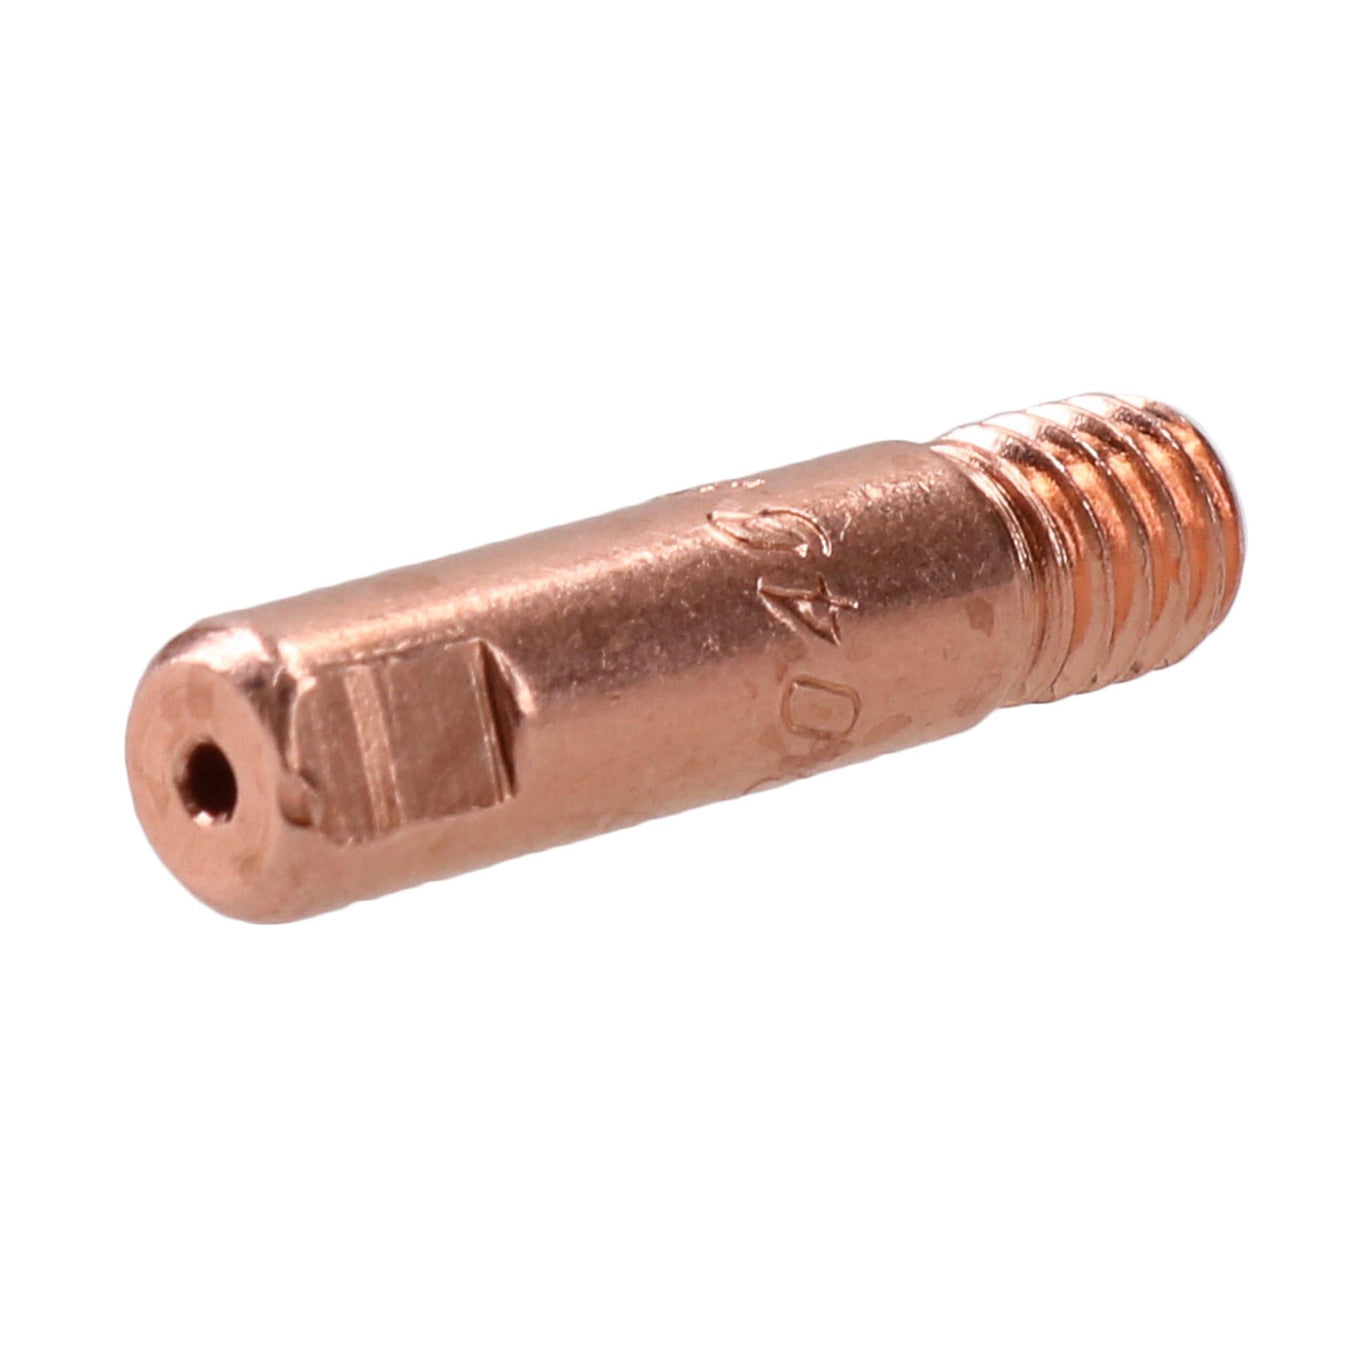 Mig Welding Welder Round Contact Tips for MB15 Euro Torches